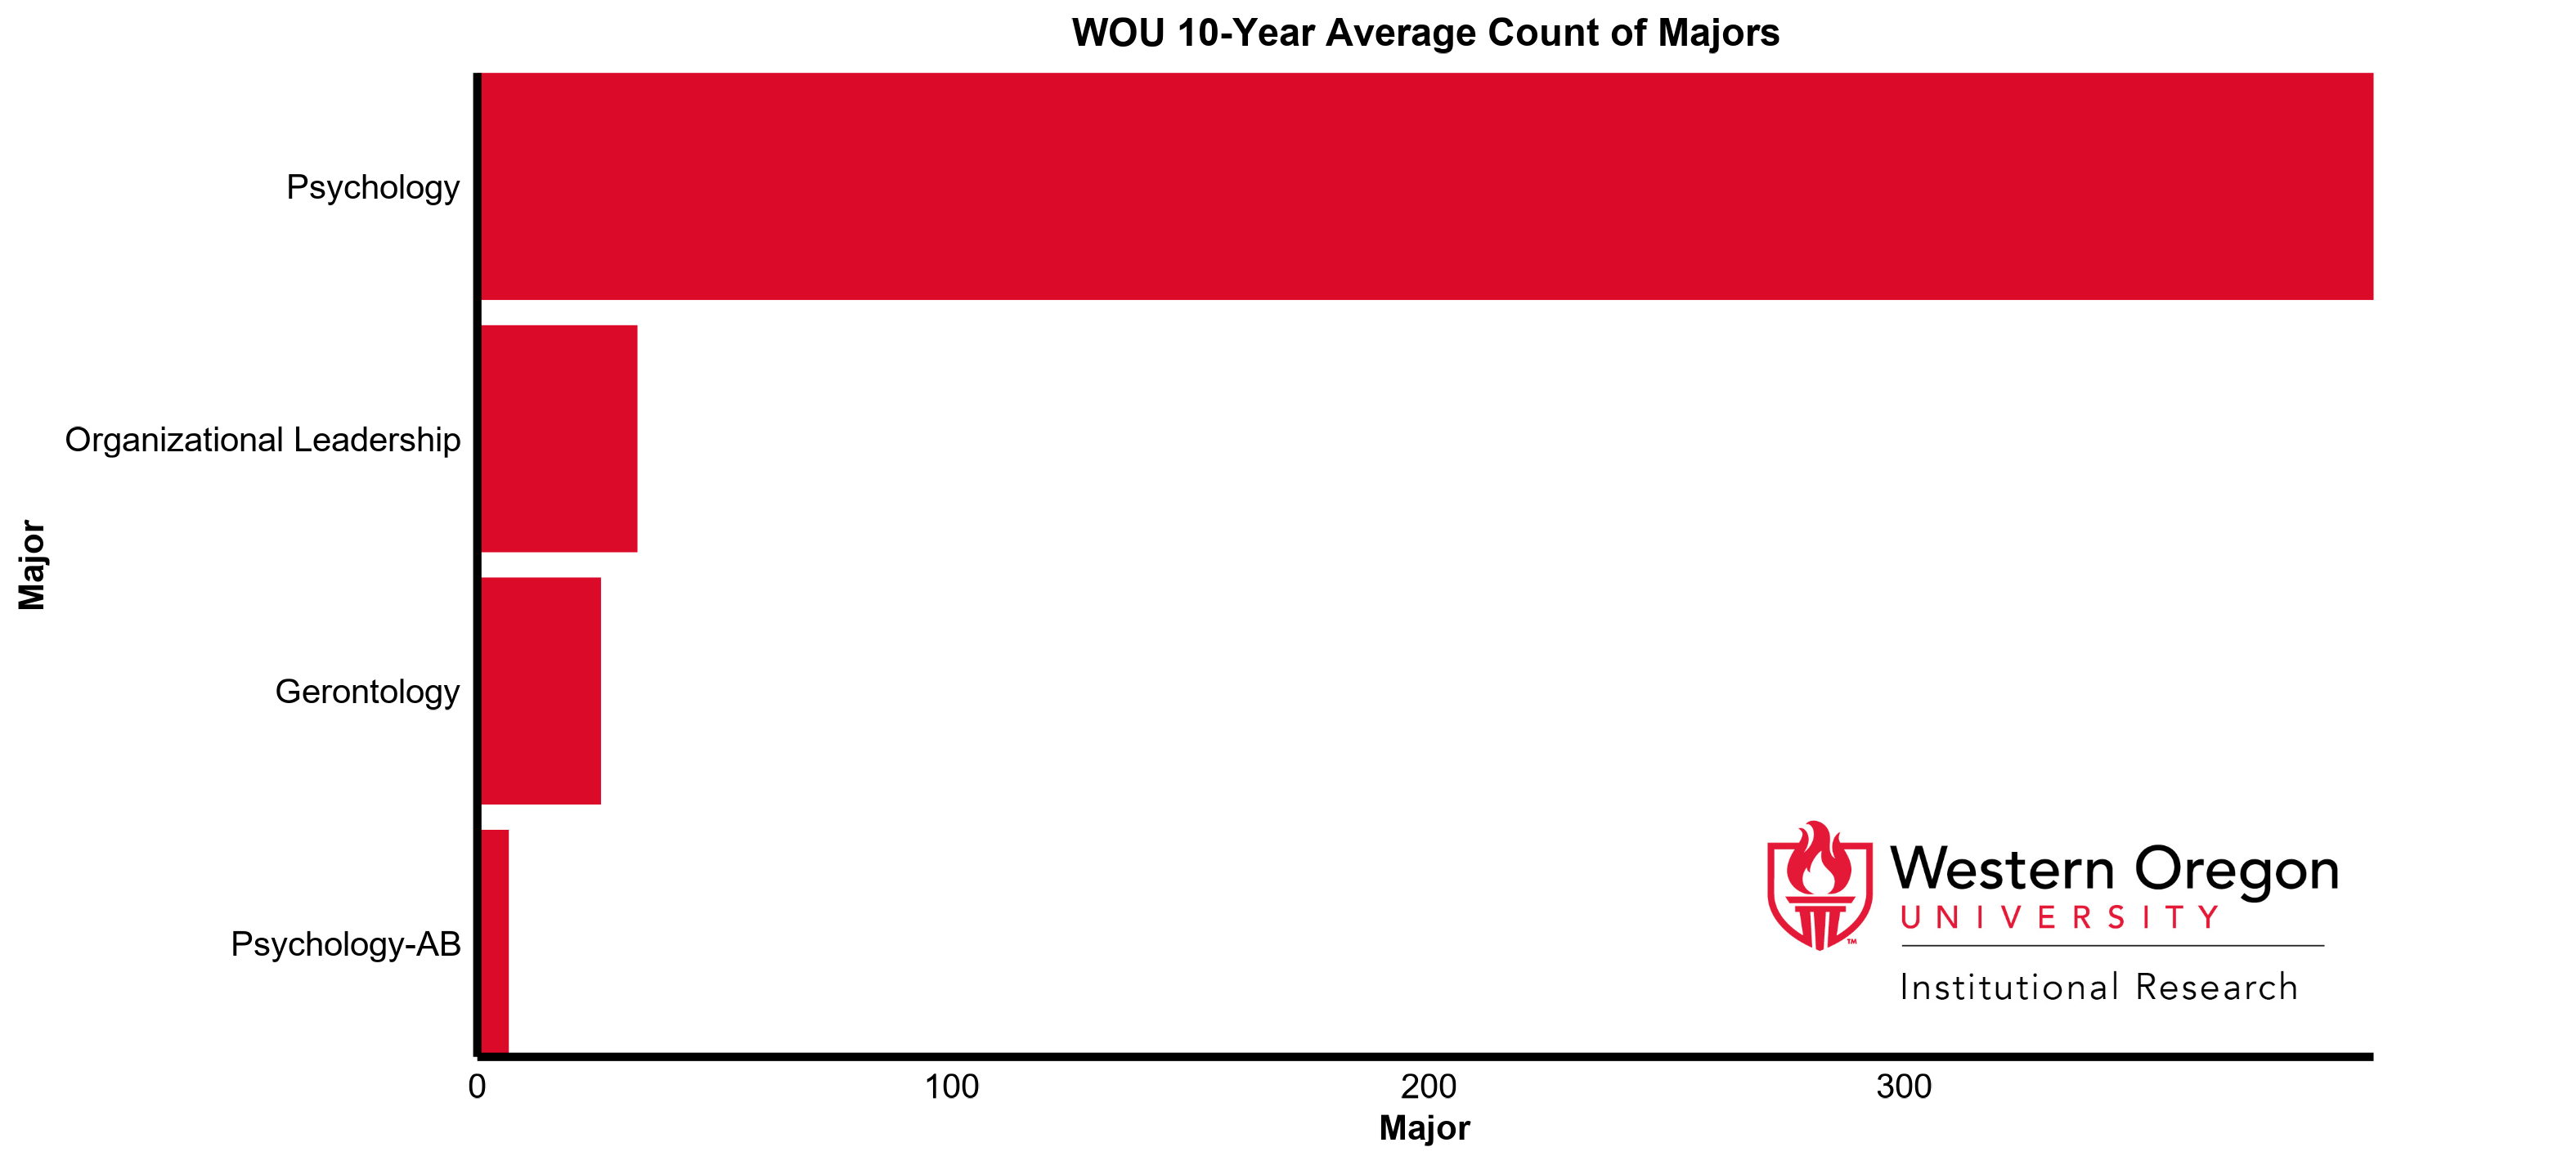 Bar graph of the 10-year average count of majors at WOU for the Behavioral Sciences division